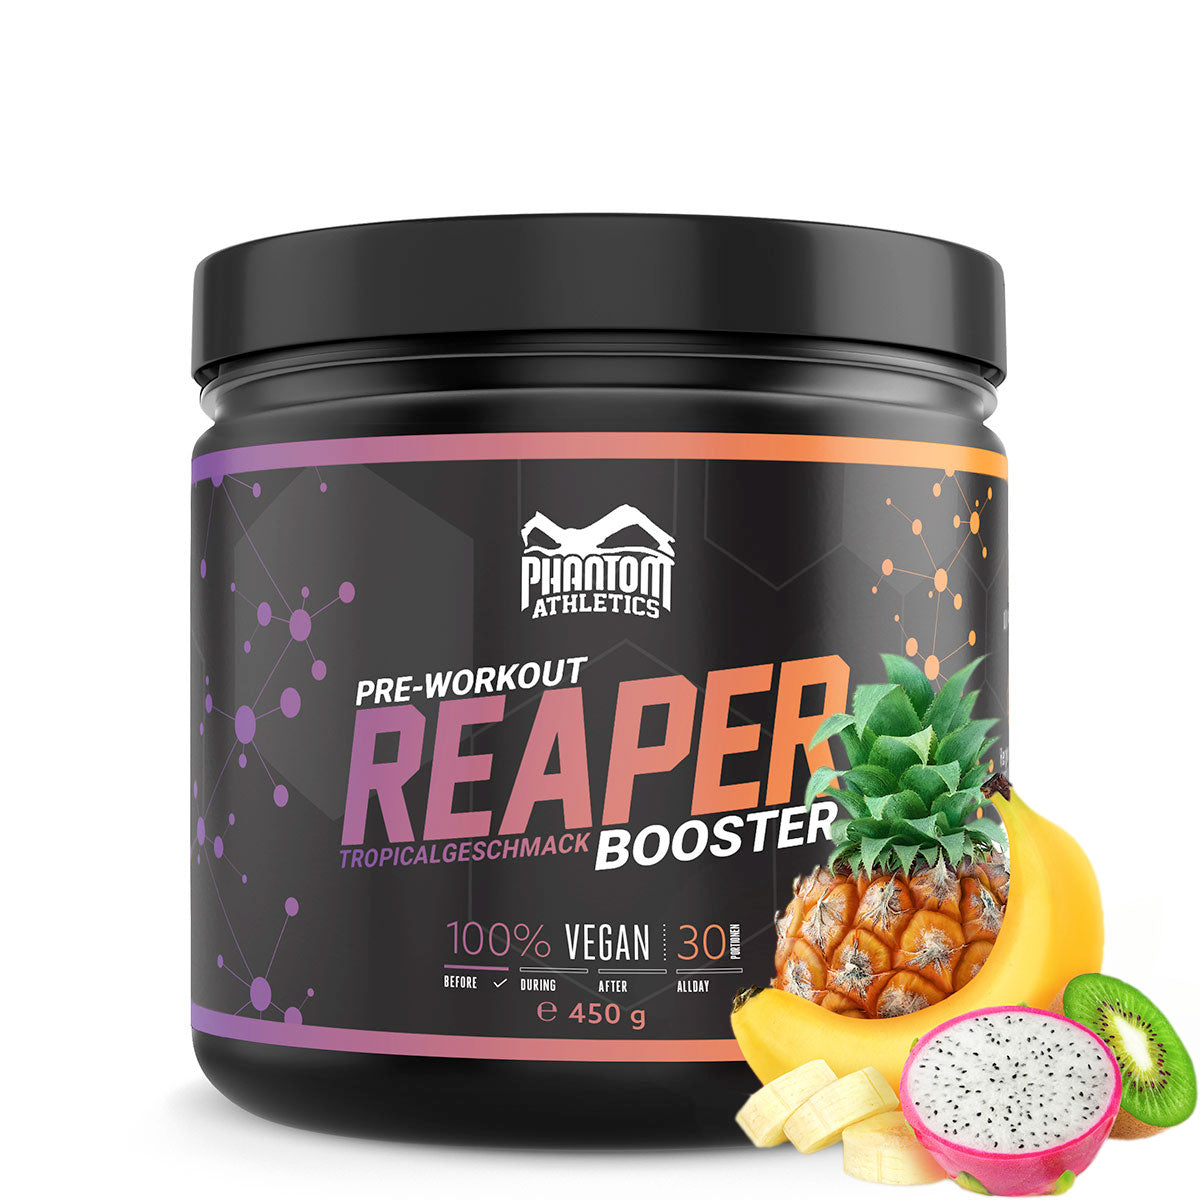 The Phantom REAPER pre-workout booster for martial arts. More energy and focus in training and competition for real fighters. With a delicious tropical taste and high-quality ingredients.